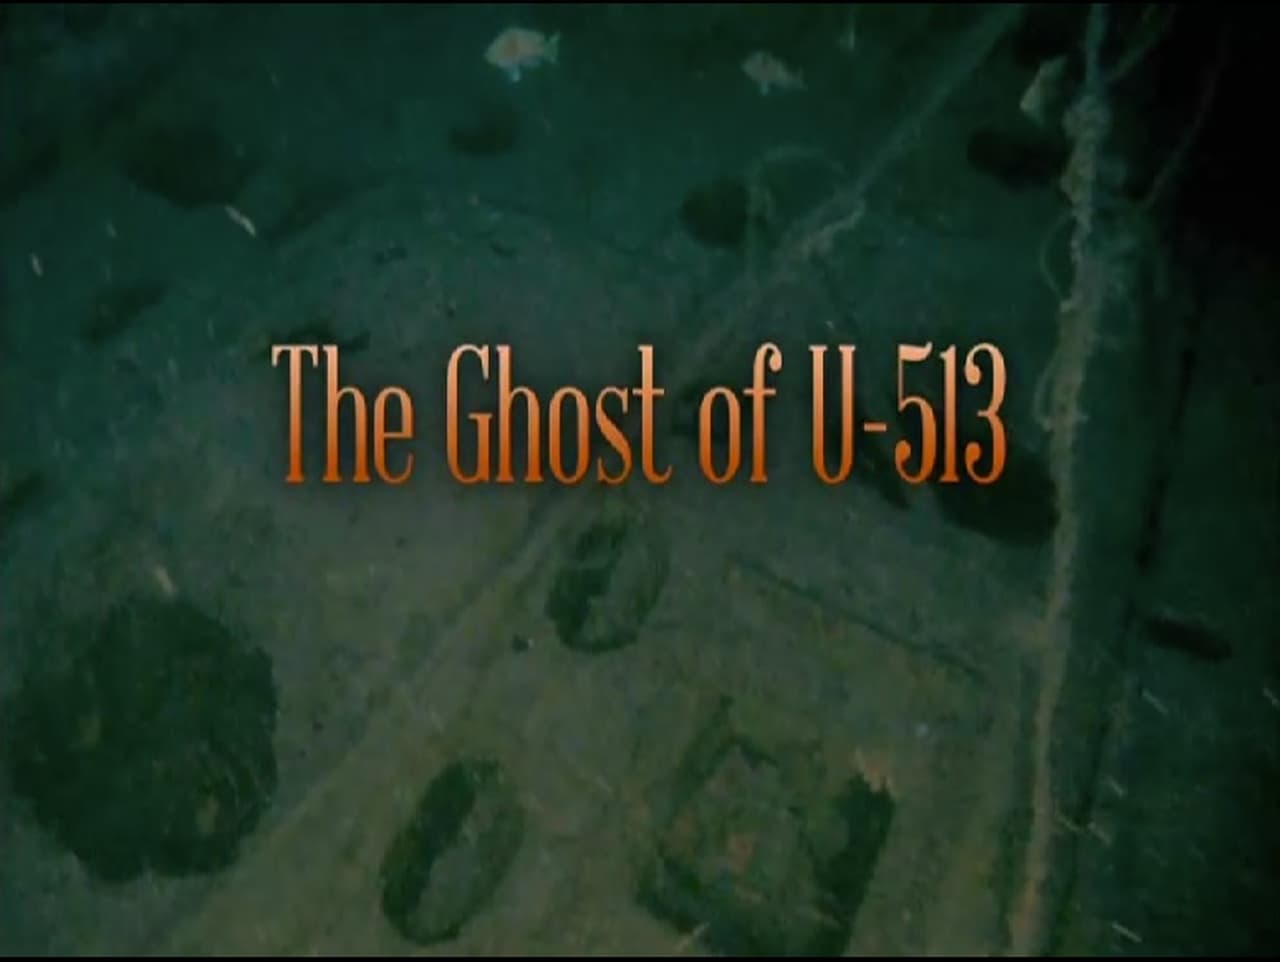 The Ghost of U513